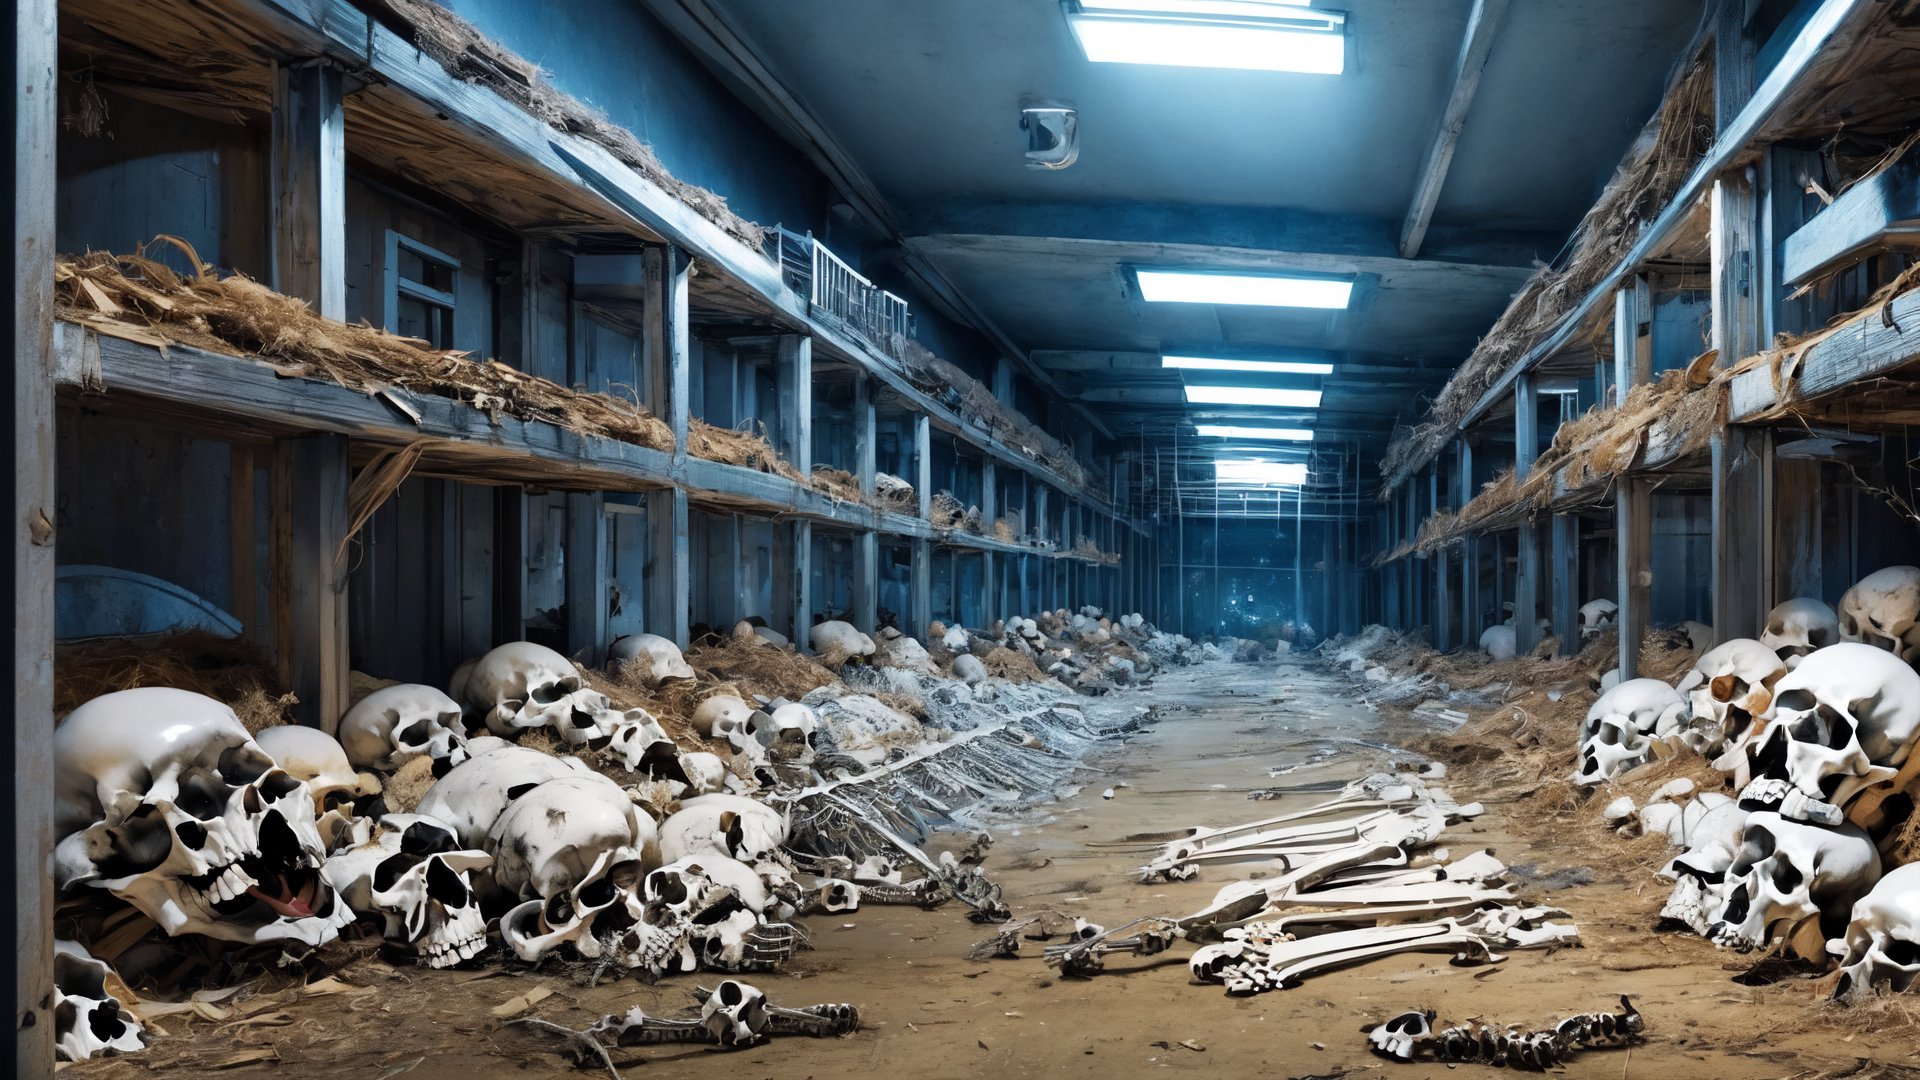 A technology prison with piles of bones,